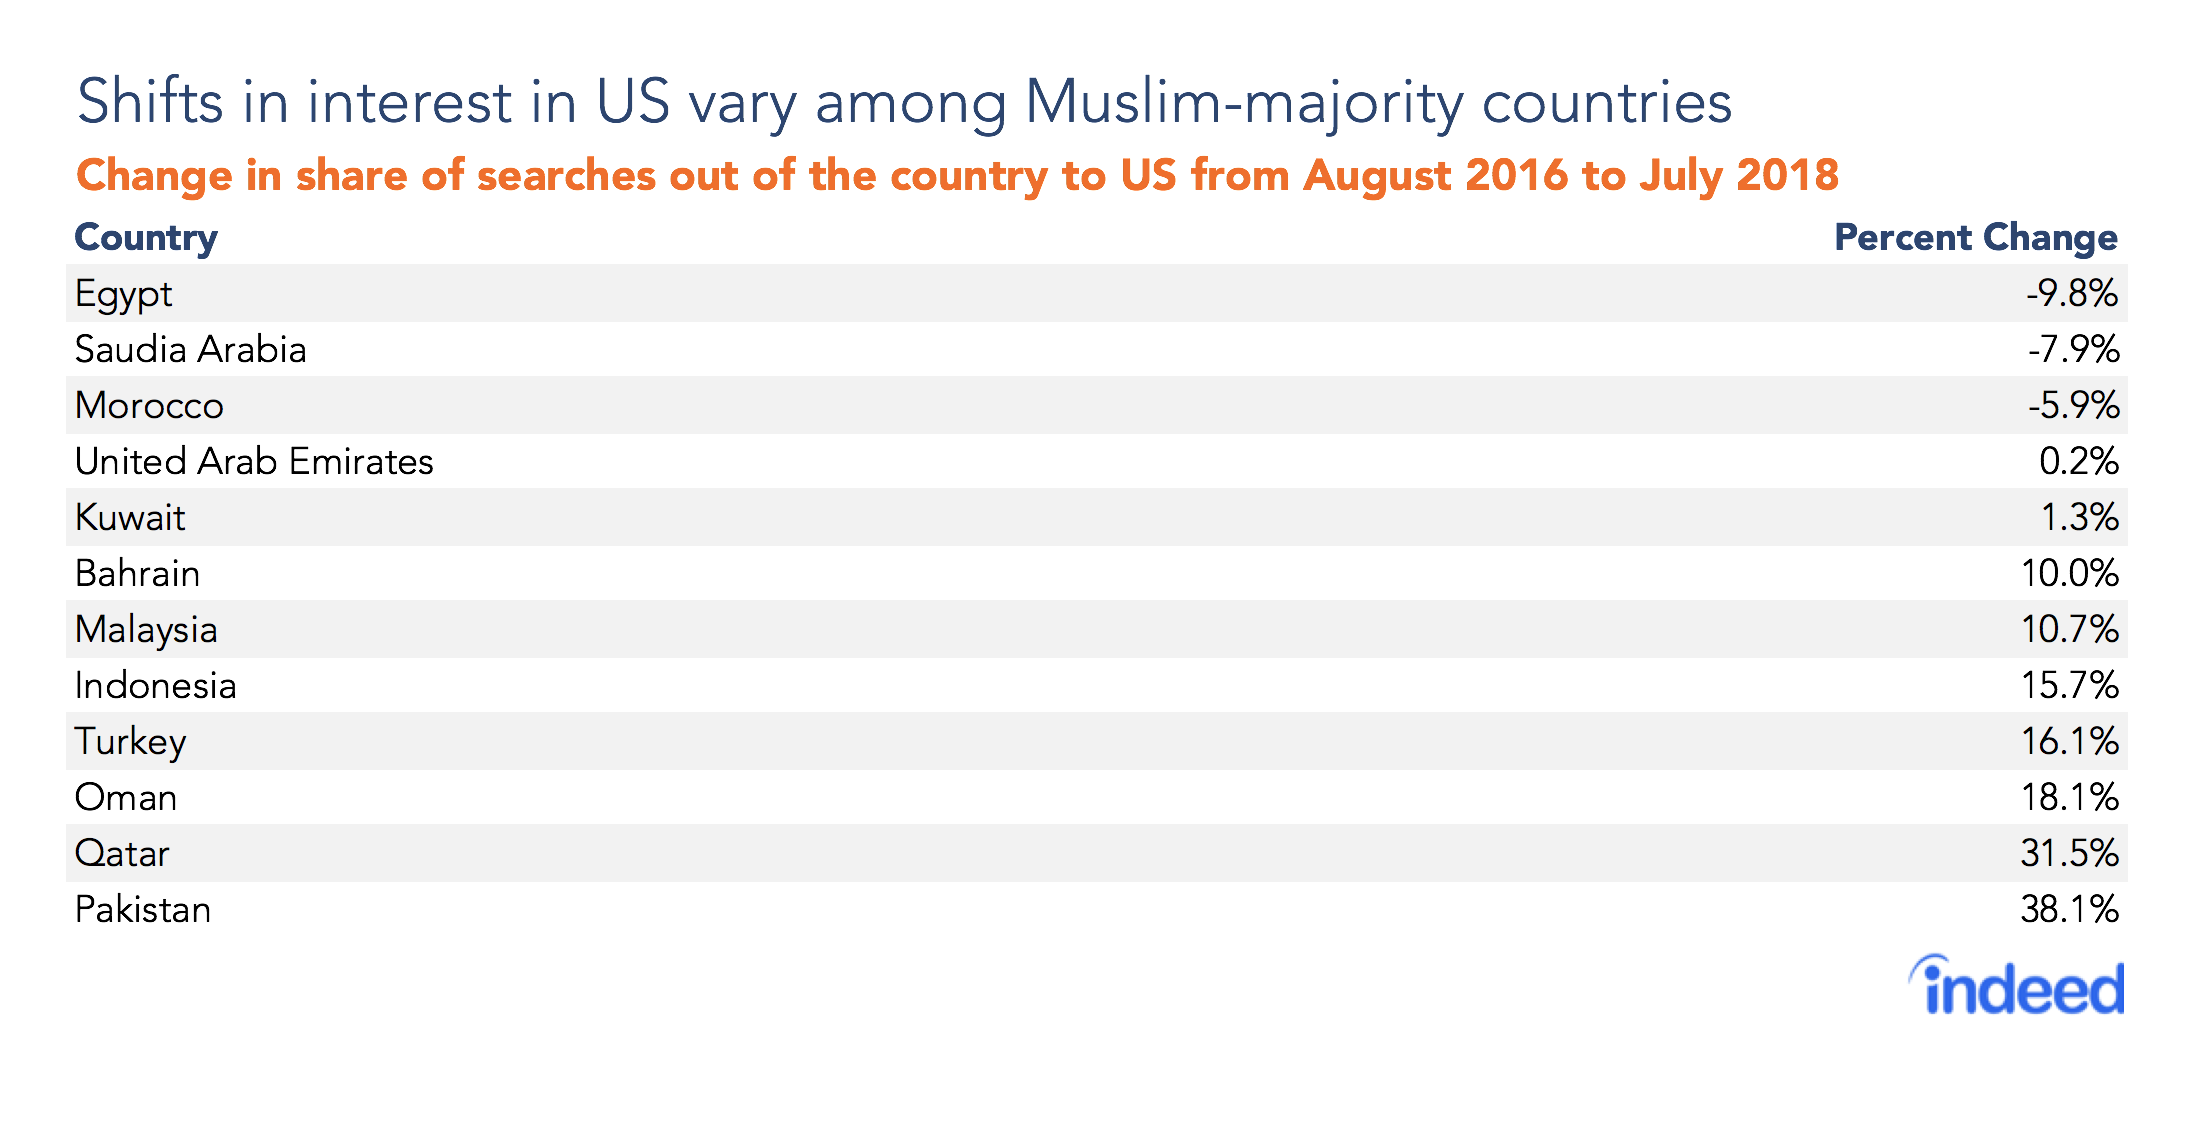 Shifts in interest in US vary among Muslim-majority countries